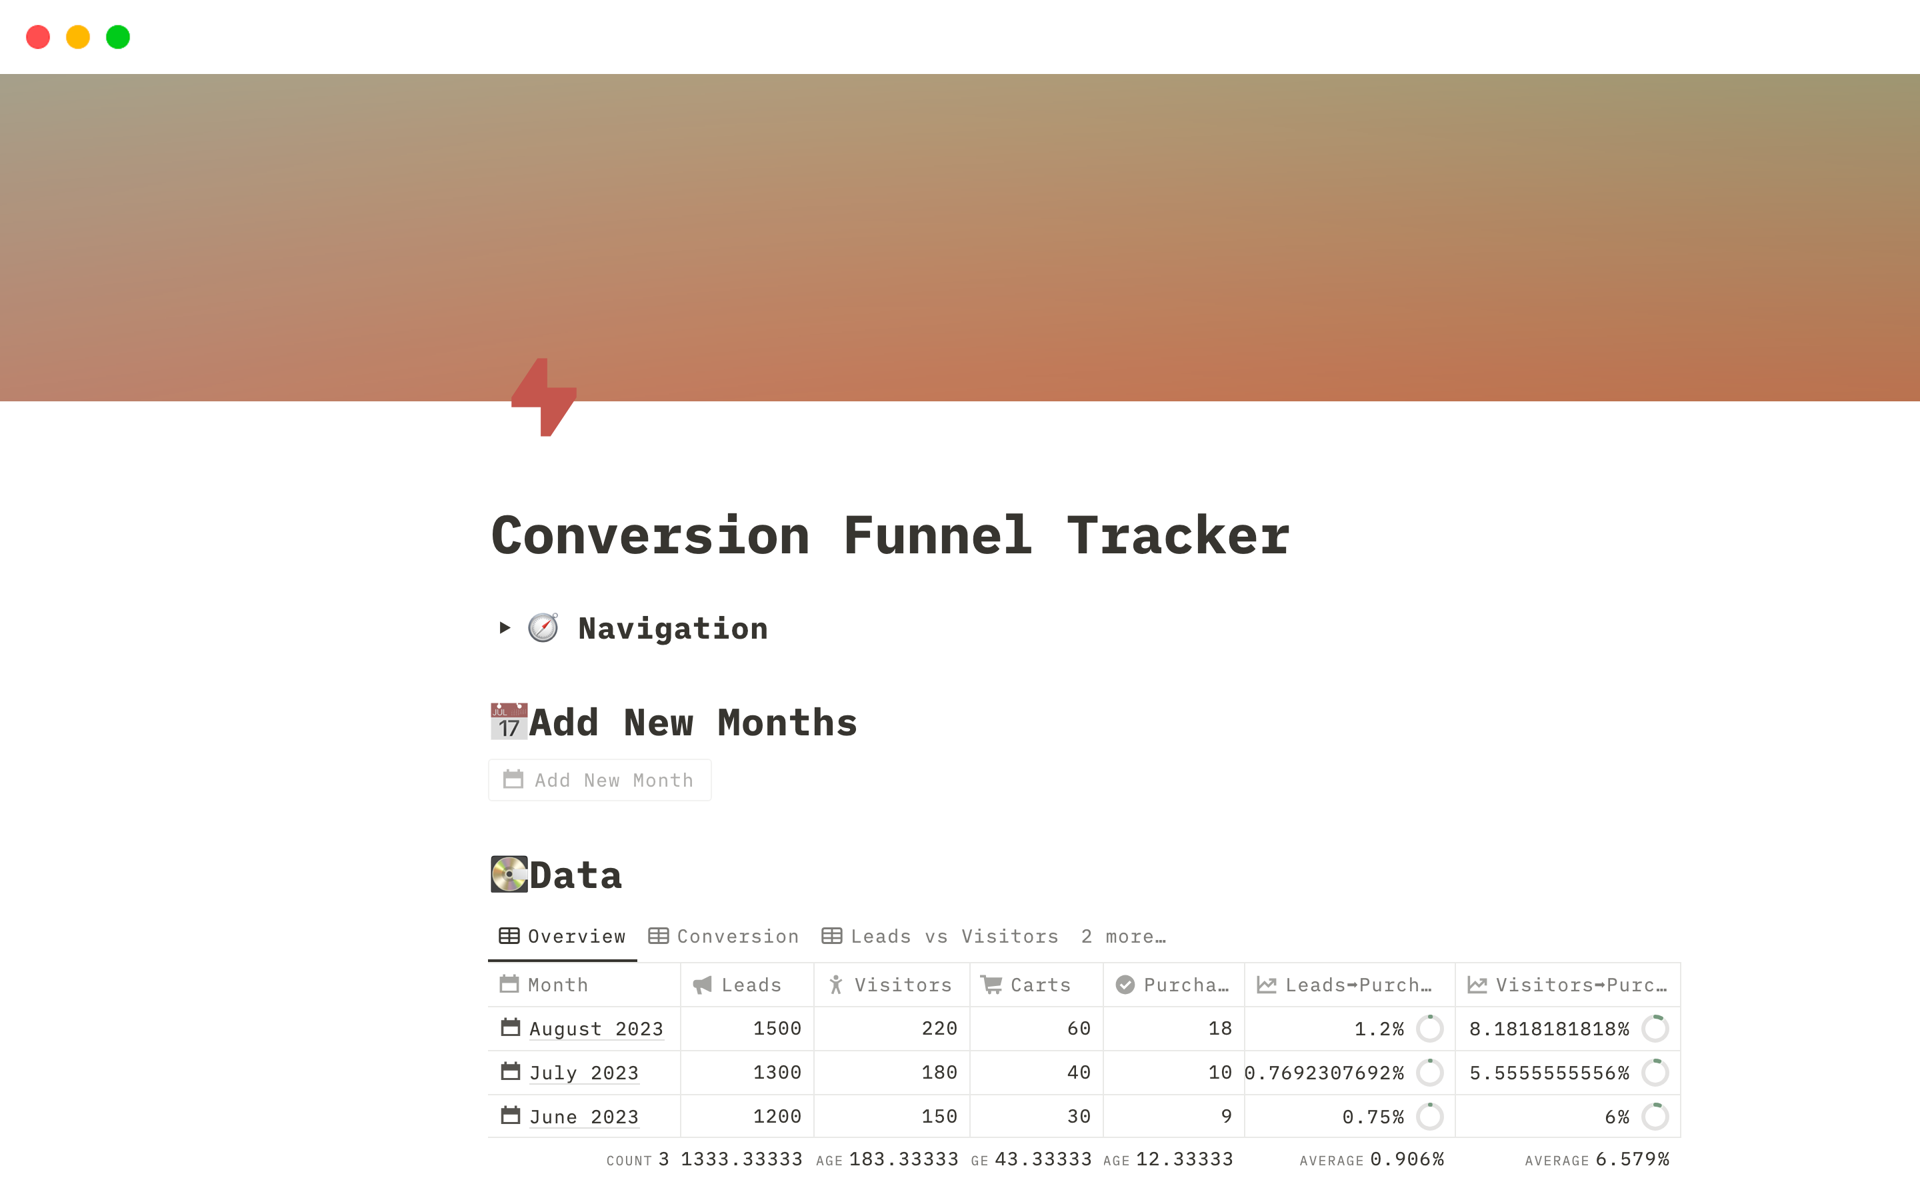 Optimize your e-commerce success with my Conversion Funnel Tracker, a dynamic tool to visualize, analyze, and enhance every stage of your customer journey for increased sales and growth.